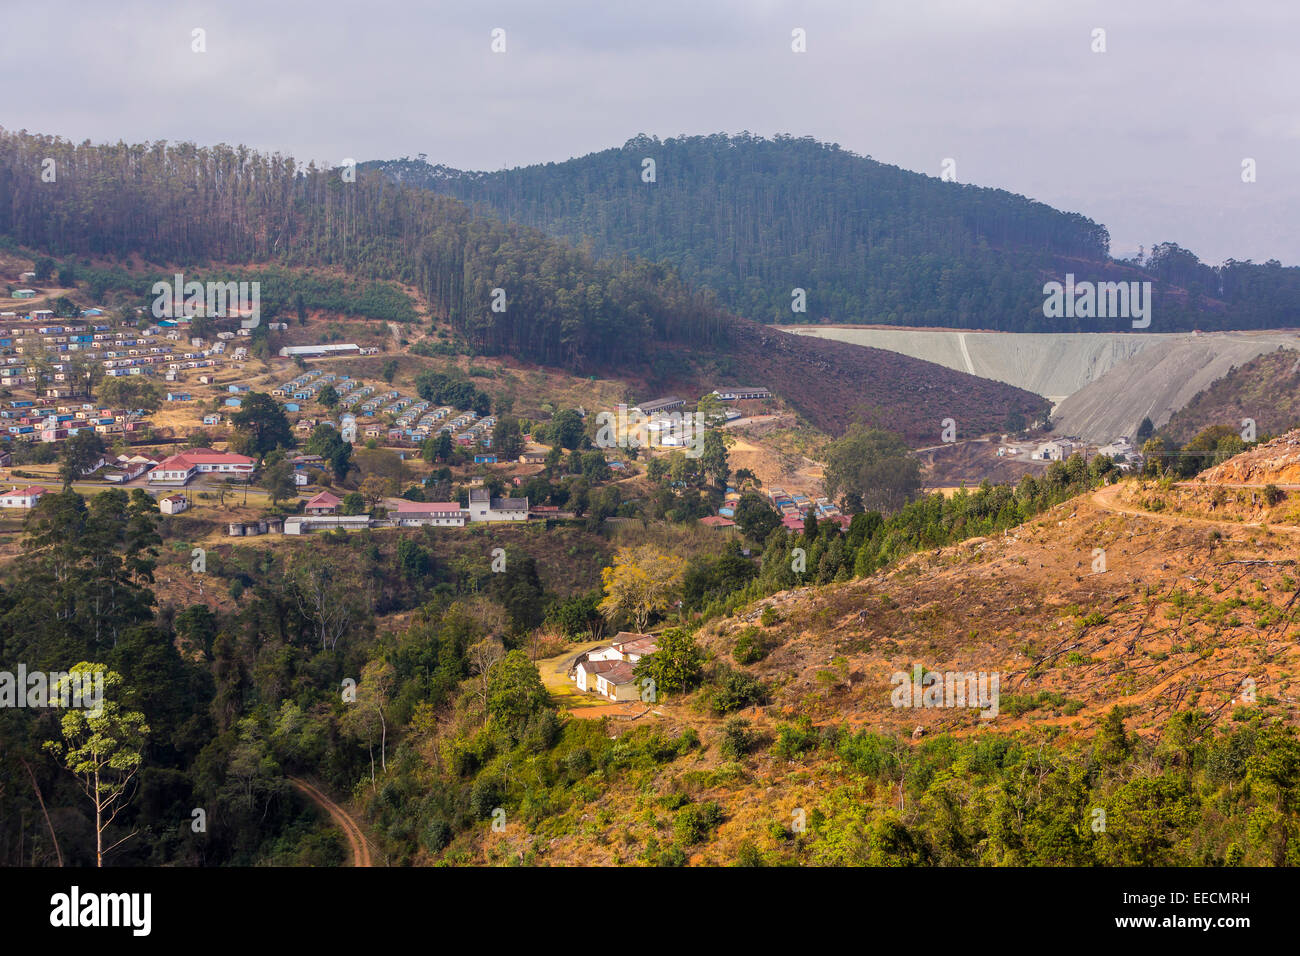 BULEMBU, SWAZILAND, AFRICA - Former asbestos mining town, now largely unoccupied. Stock Photo